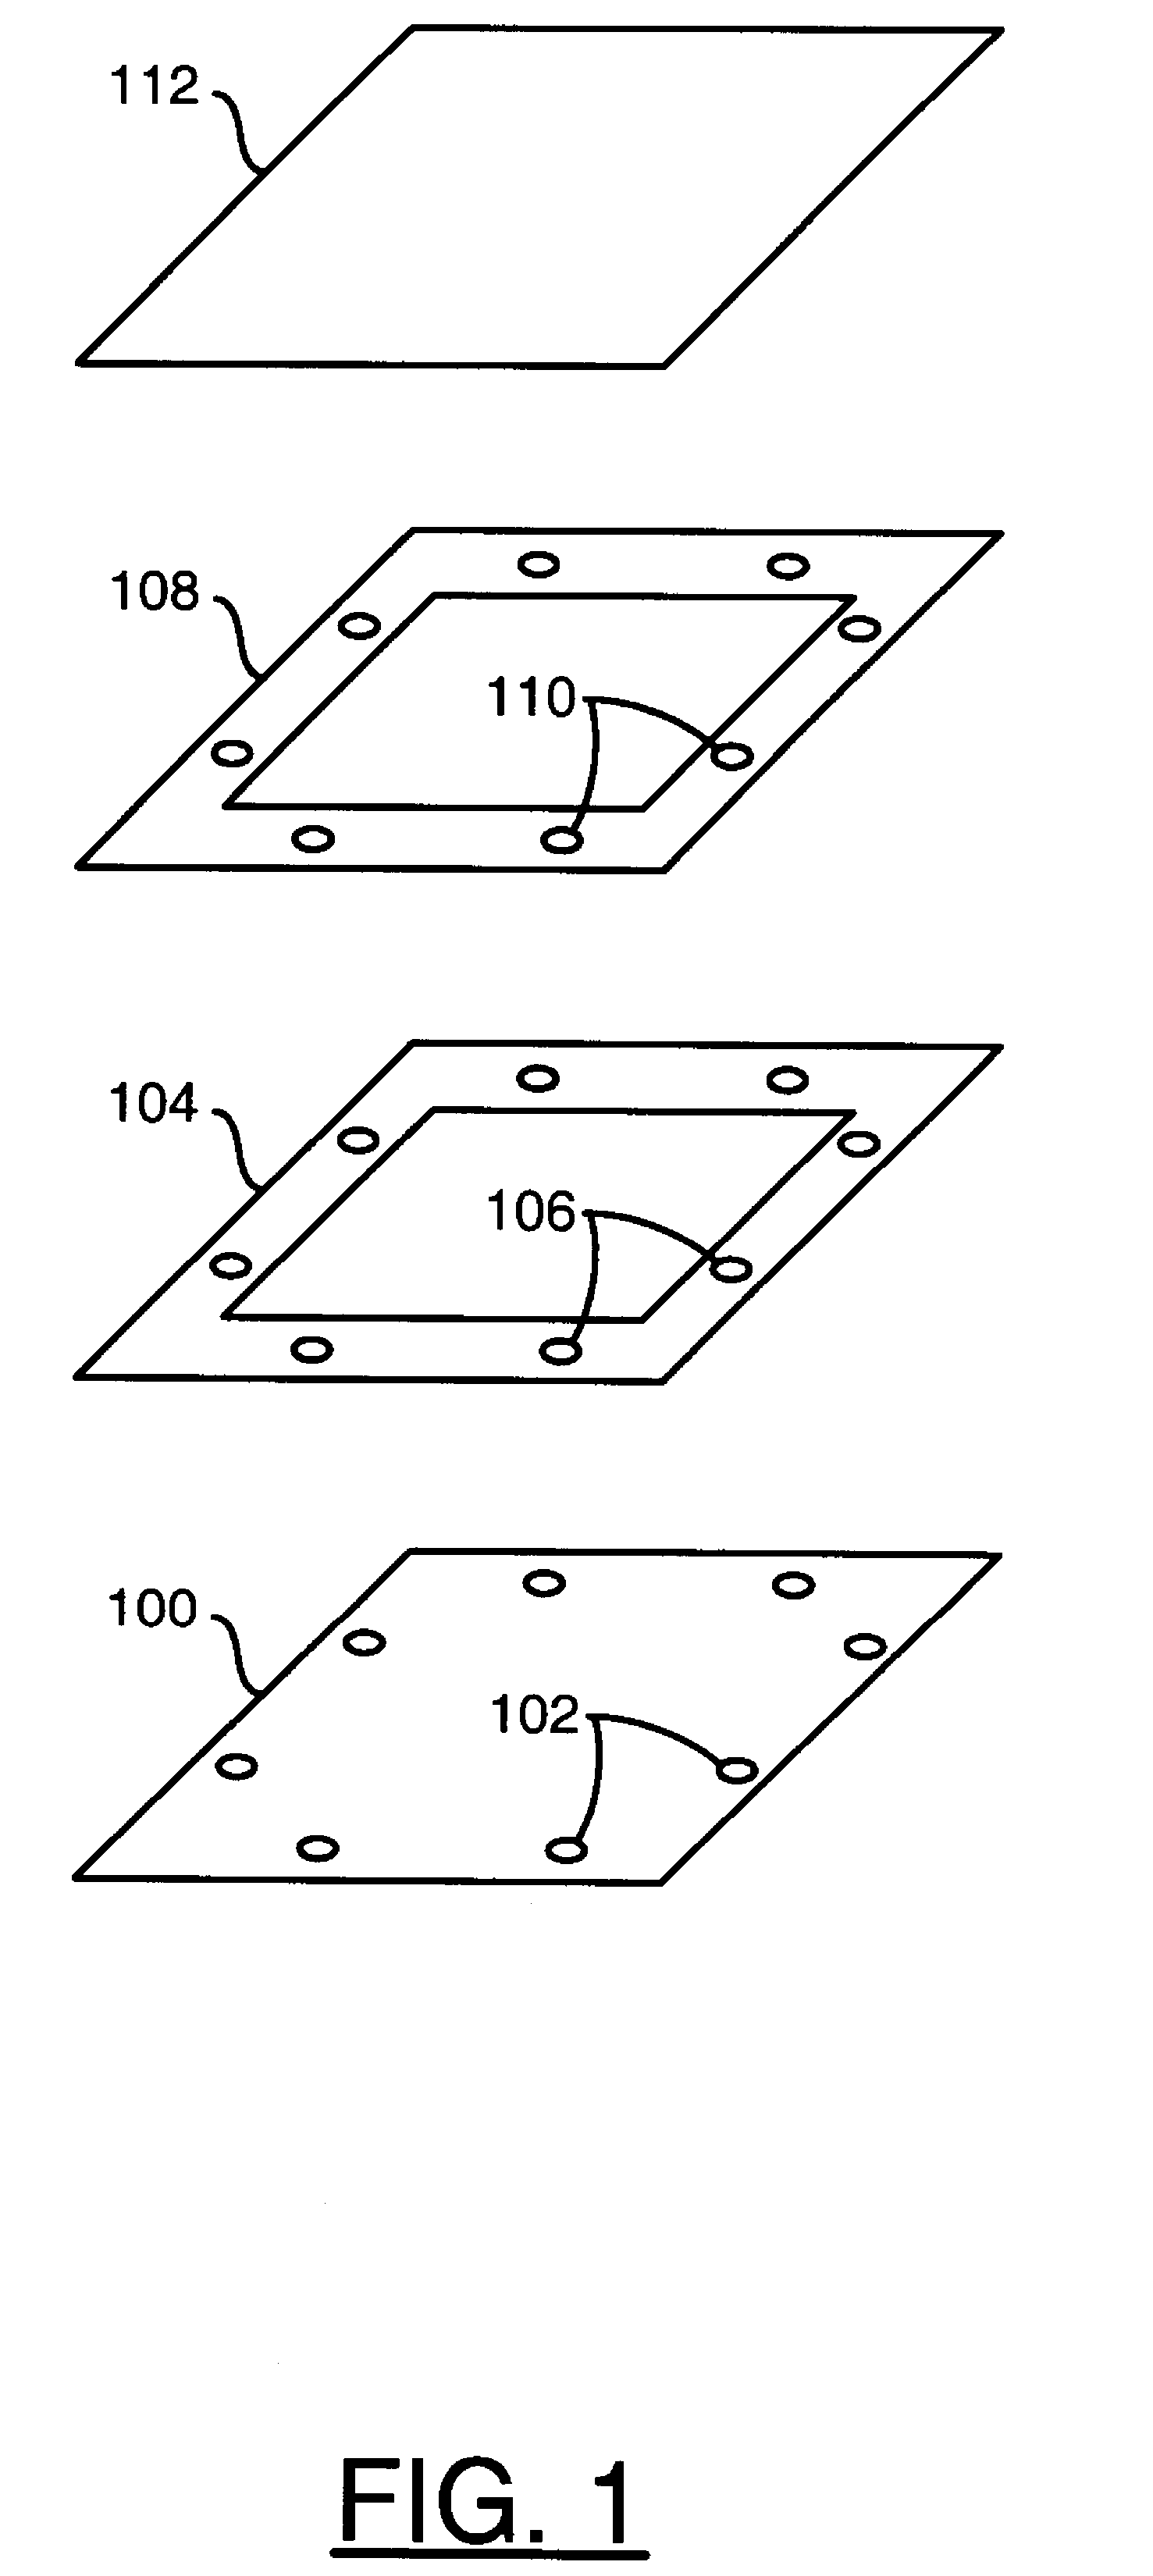 Process of grounding heat spreader/stiffener to a flip chip package using solder and film adhesive